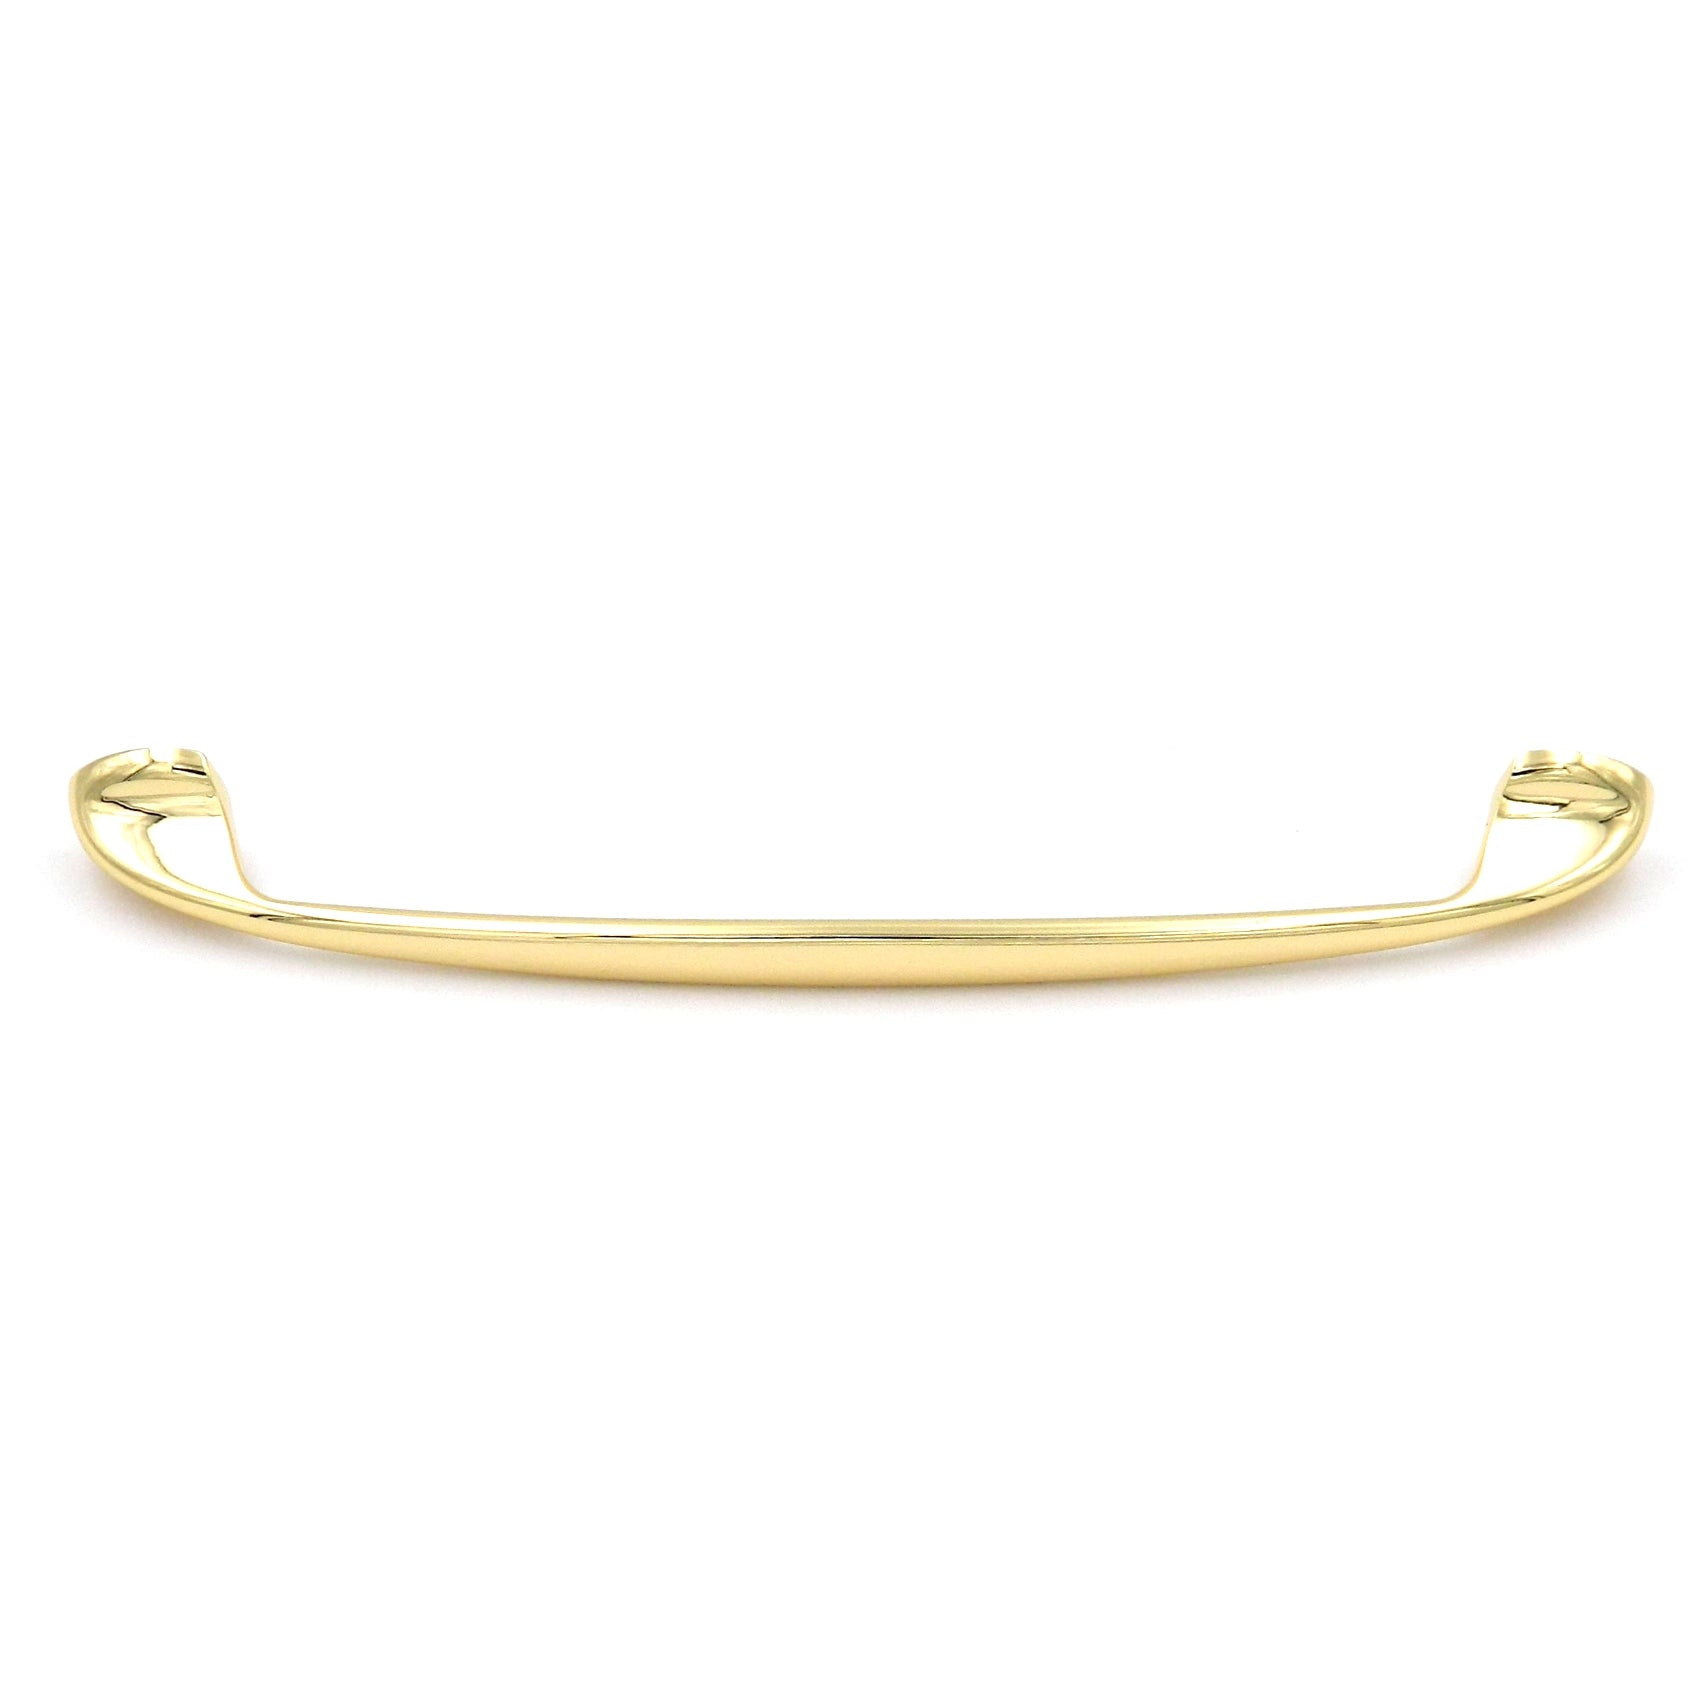 Hickory Vanguard P3081-PB Polished Brass 5" (128mm)cc Arch Cabinet Handle Pull